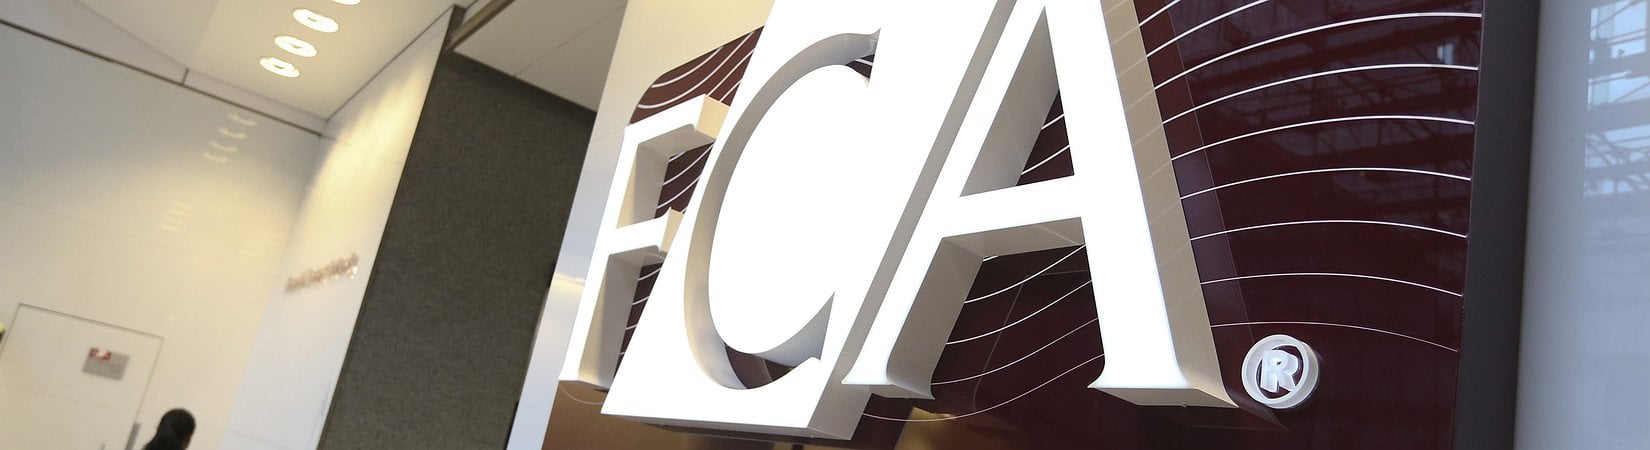 UK's FCA Suspends Epayments Service - Over £100M Frozen and Alleged Onecoin Connection